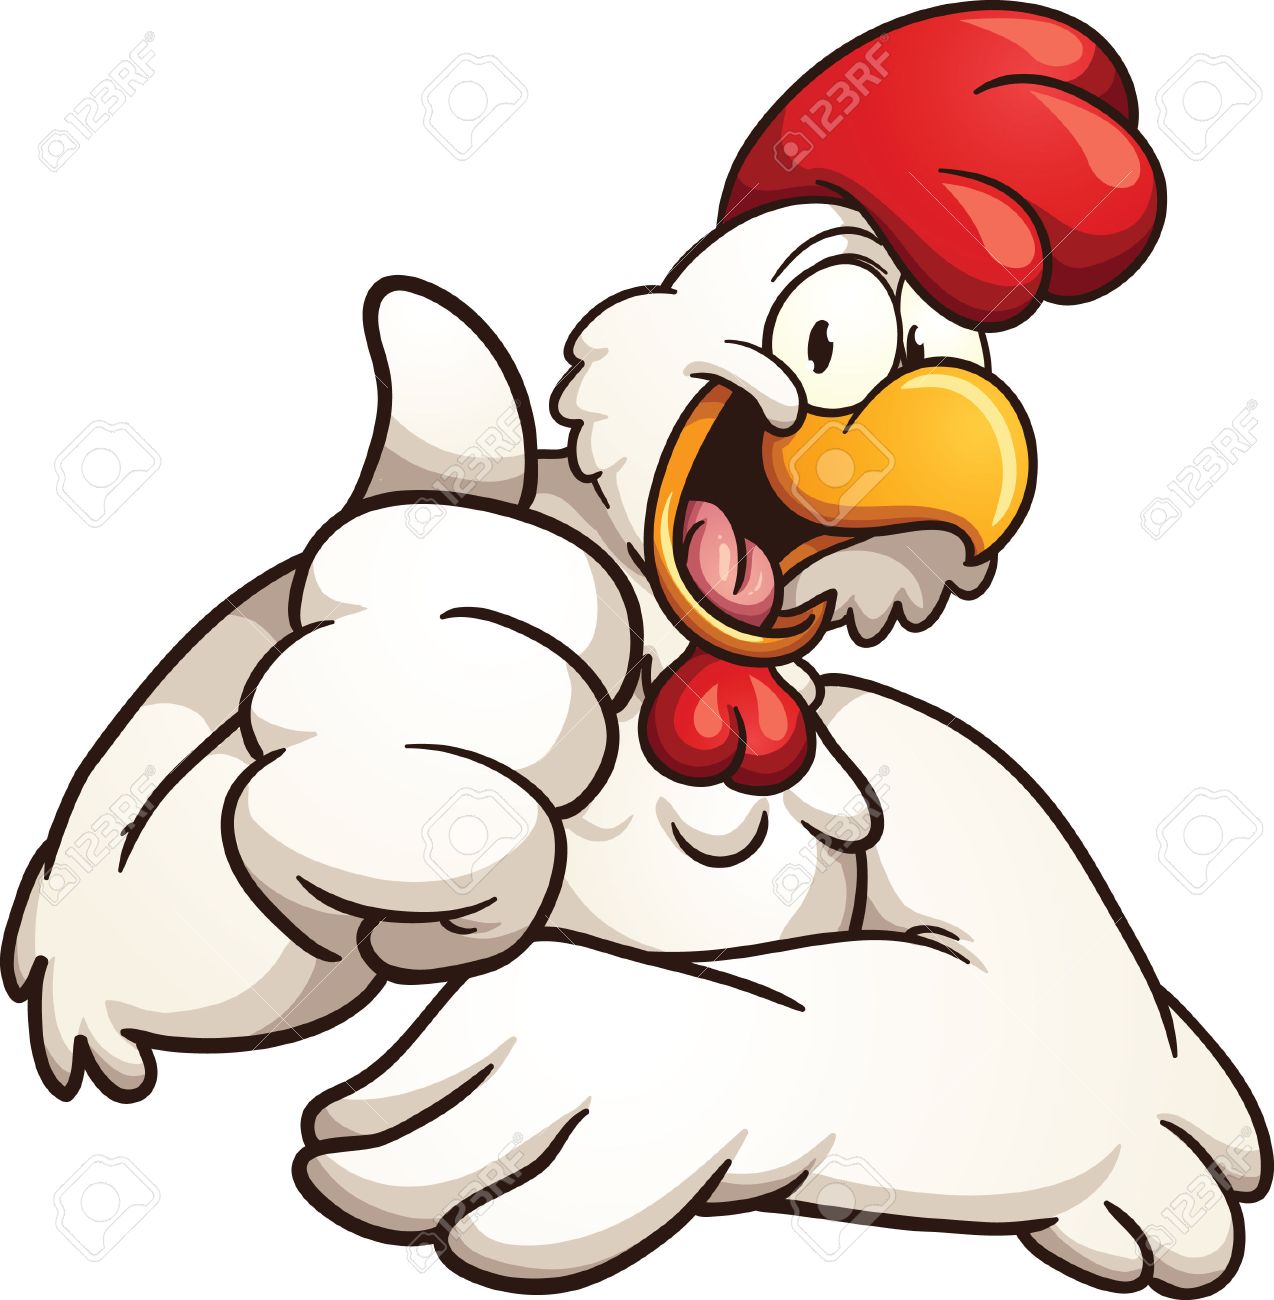 Clipart huhn » Clipart Station.